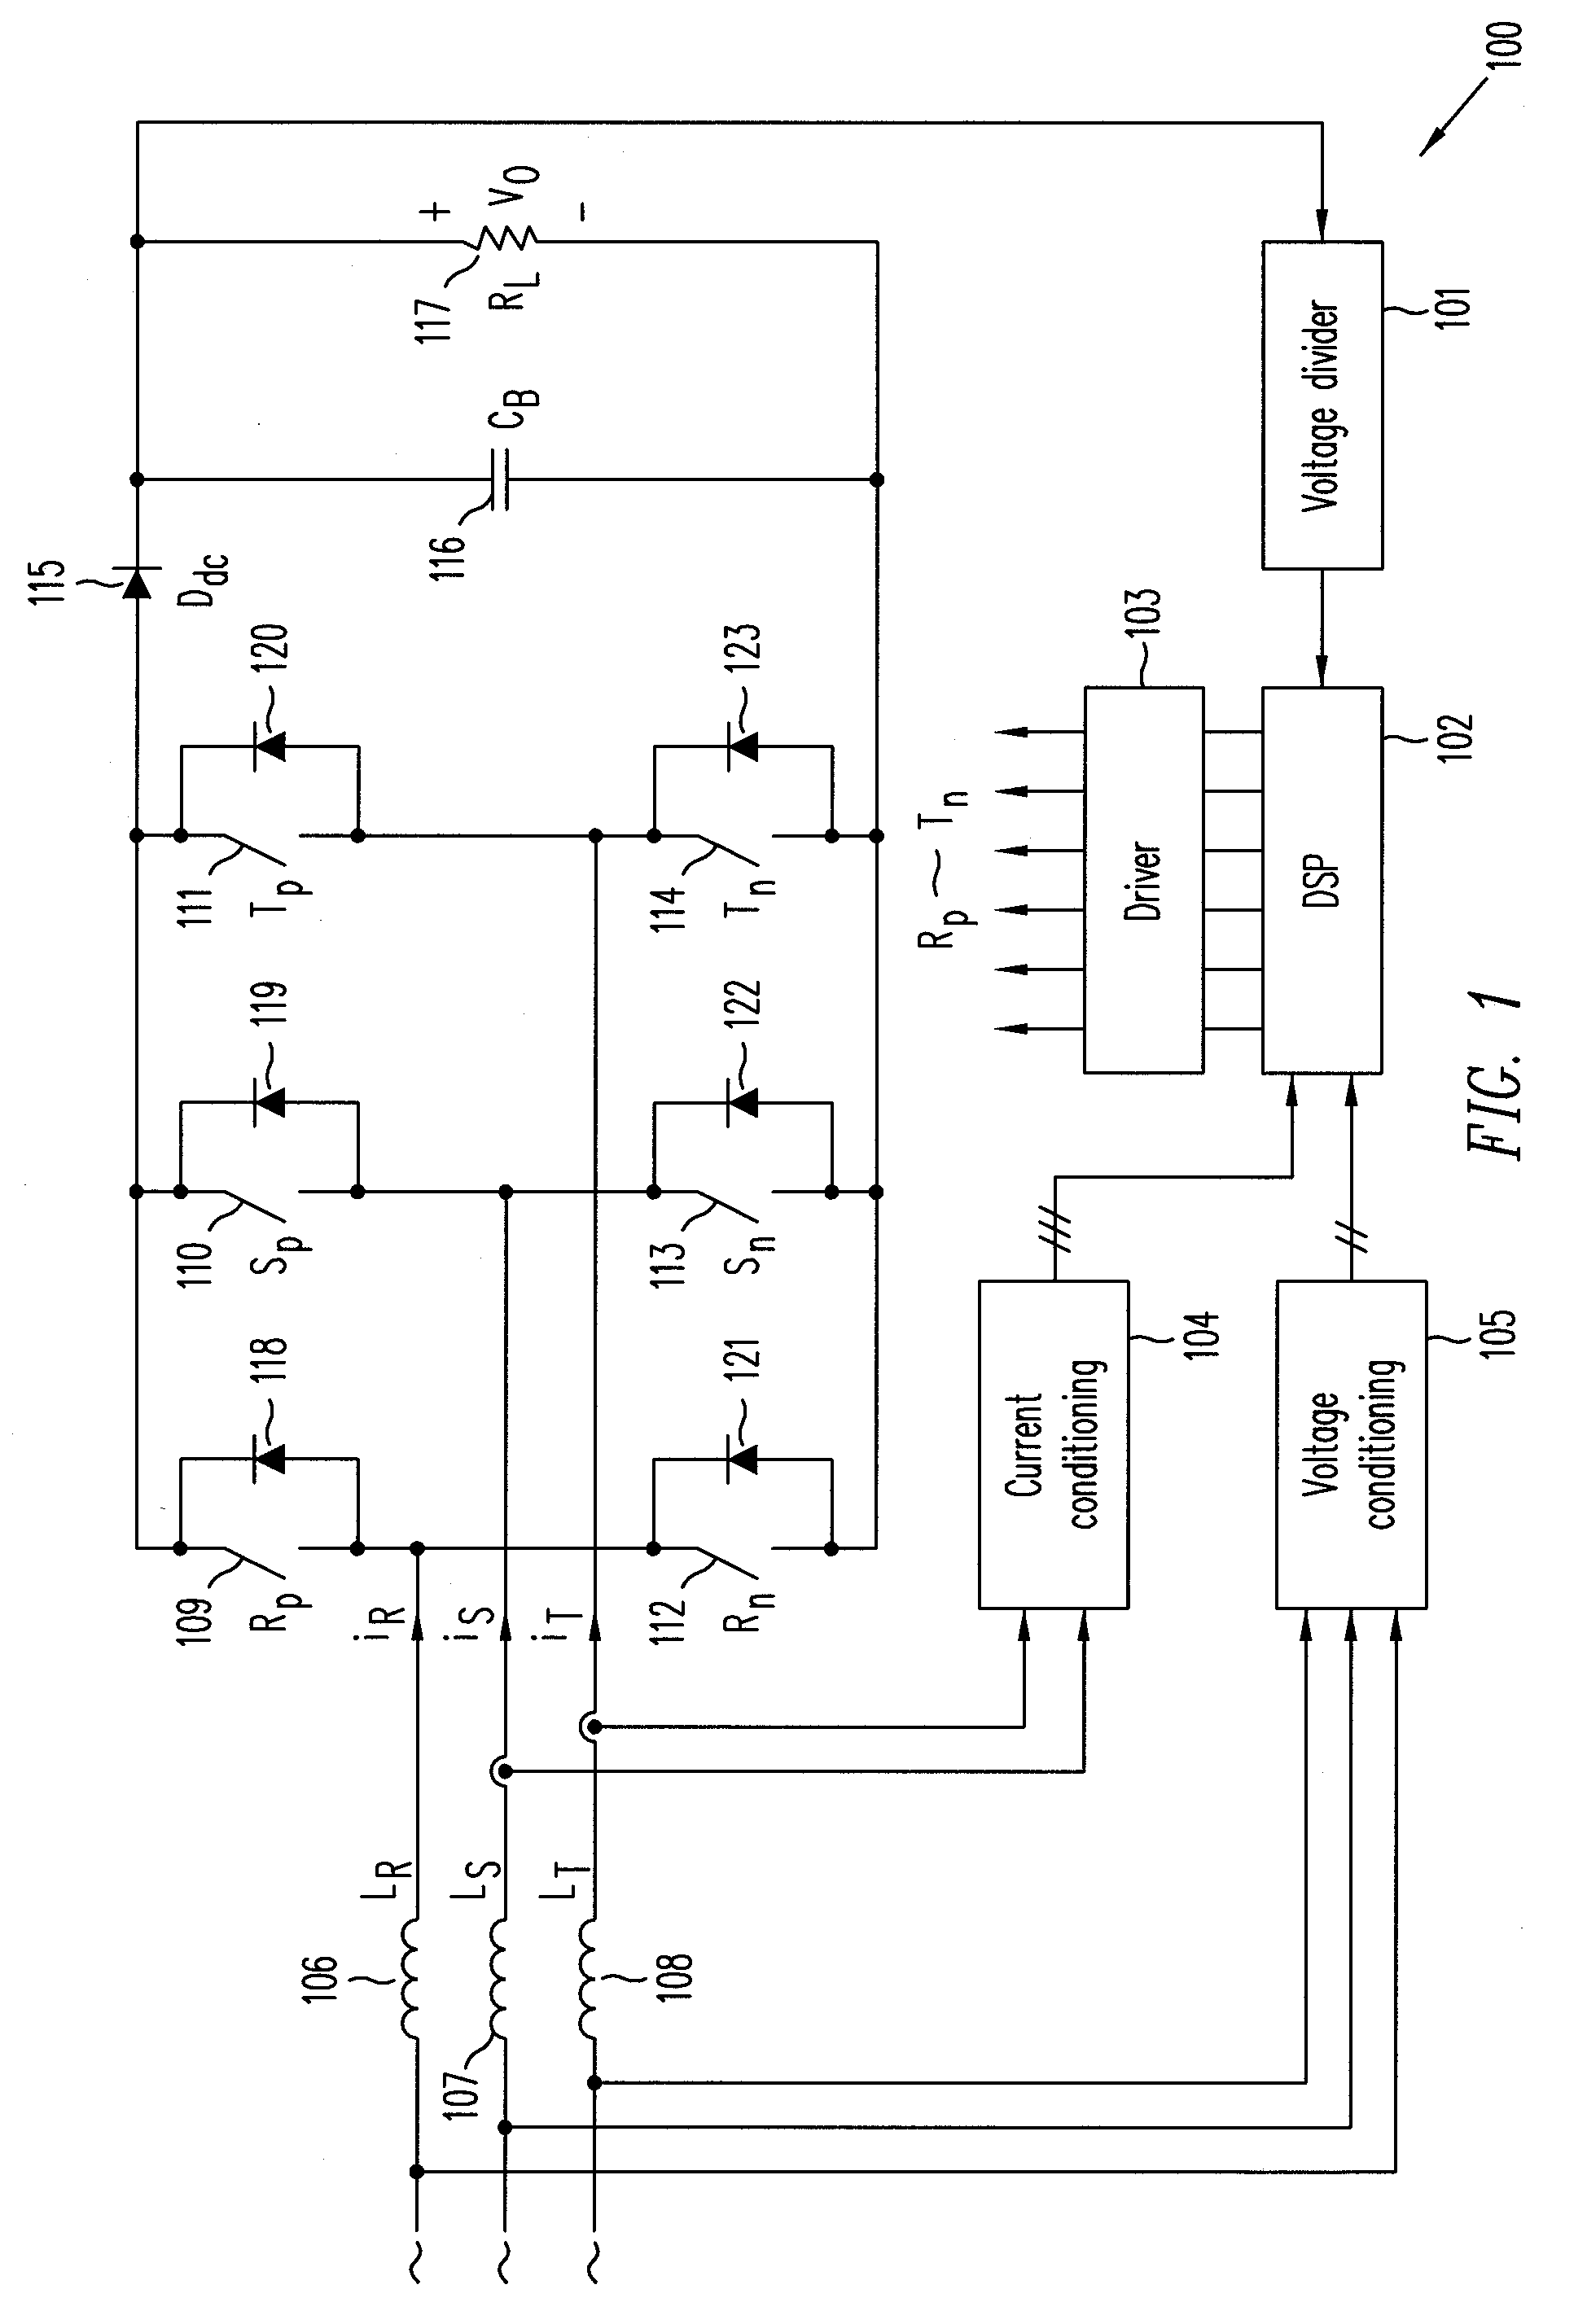 Digitally controlled three-phase pfc rectifier